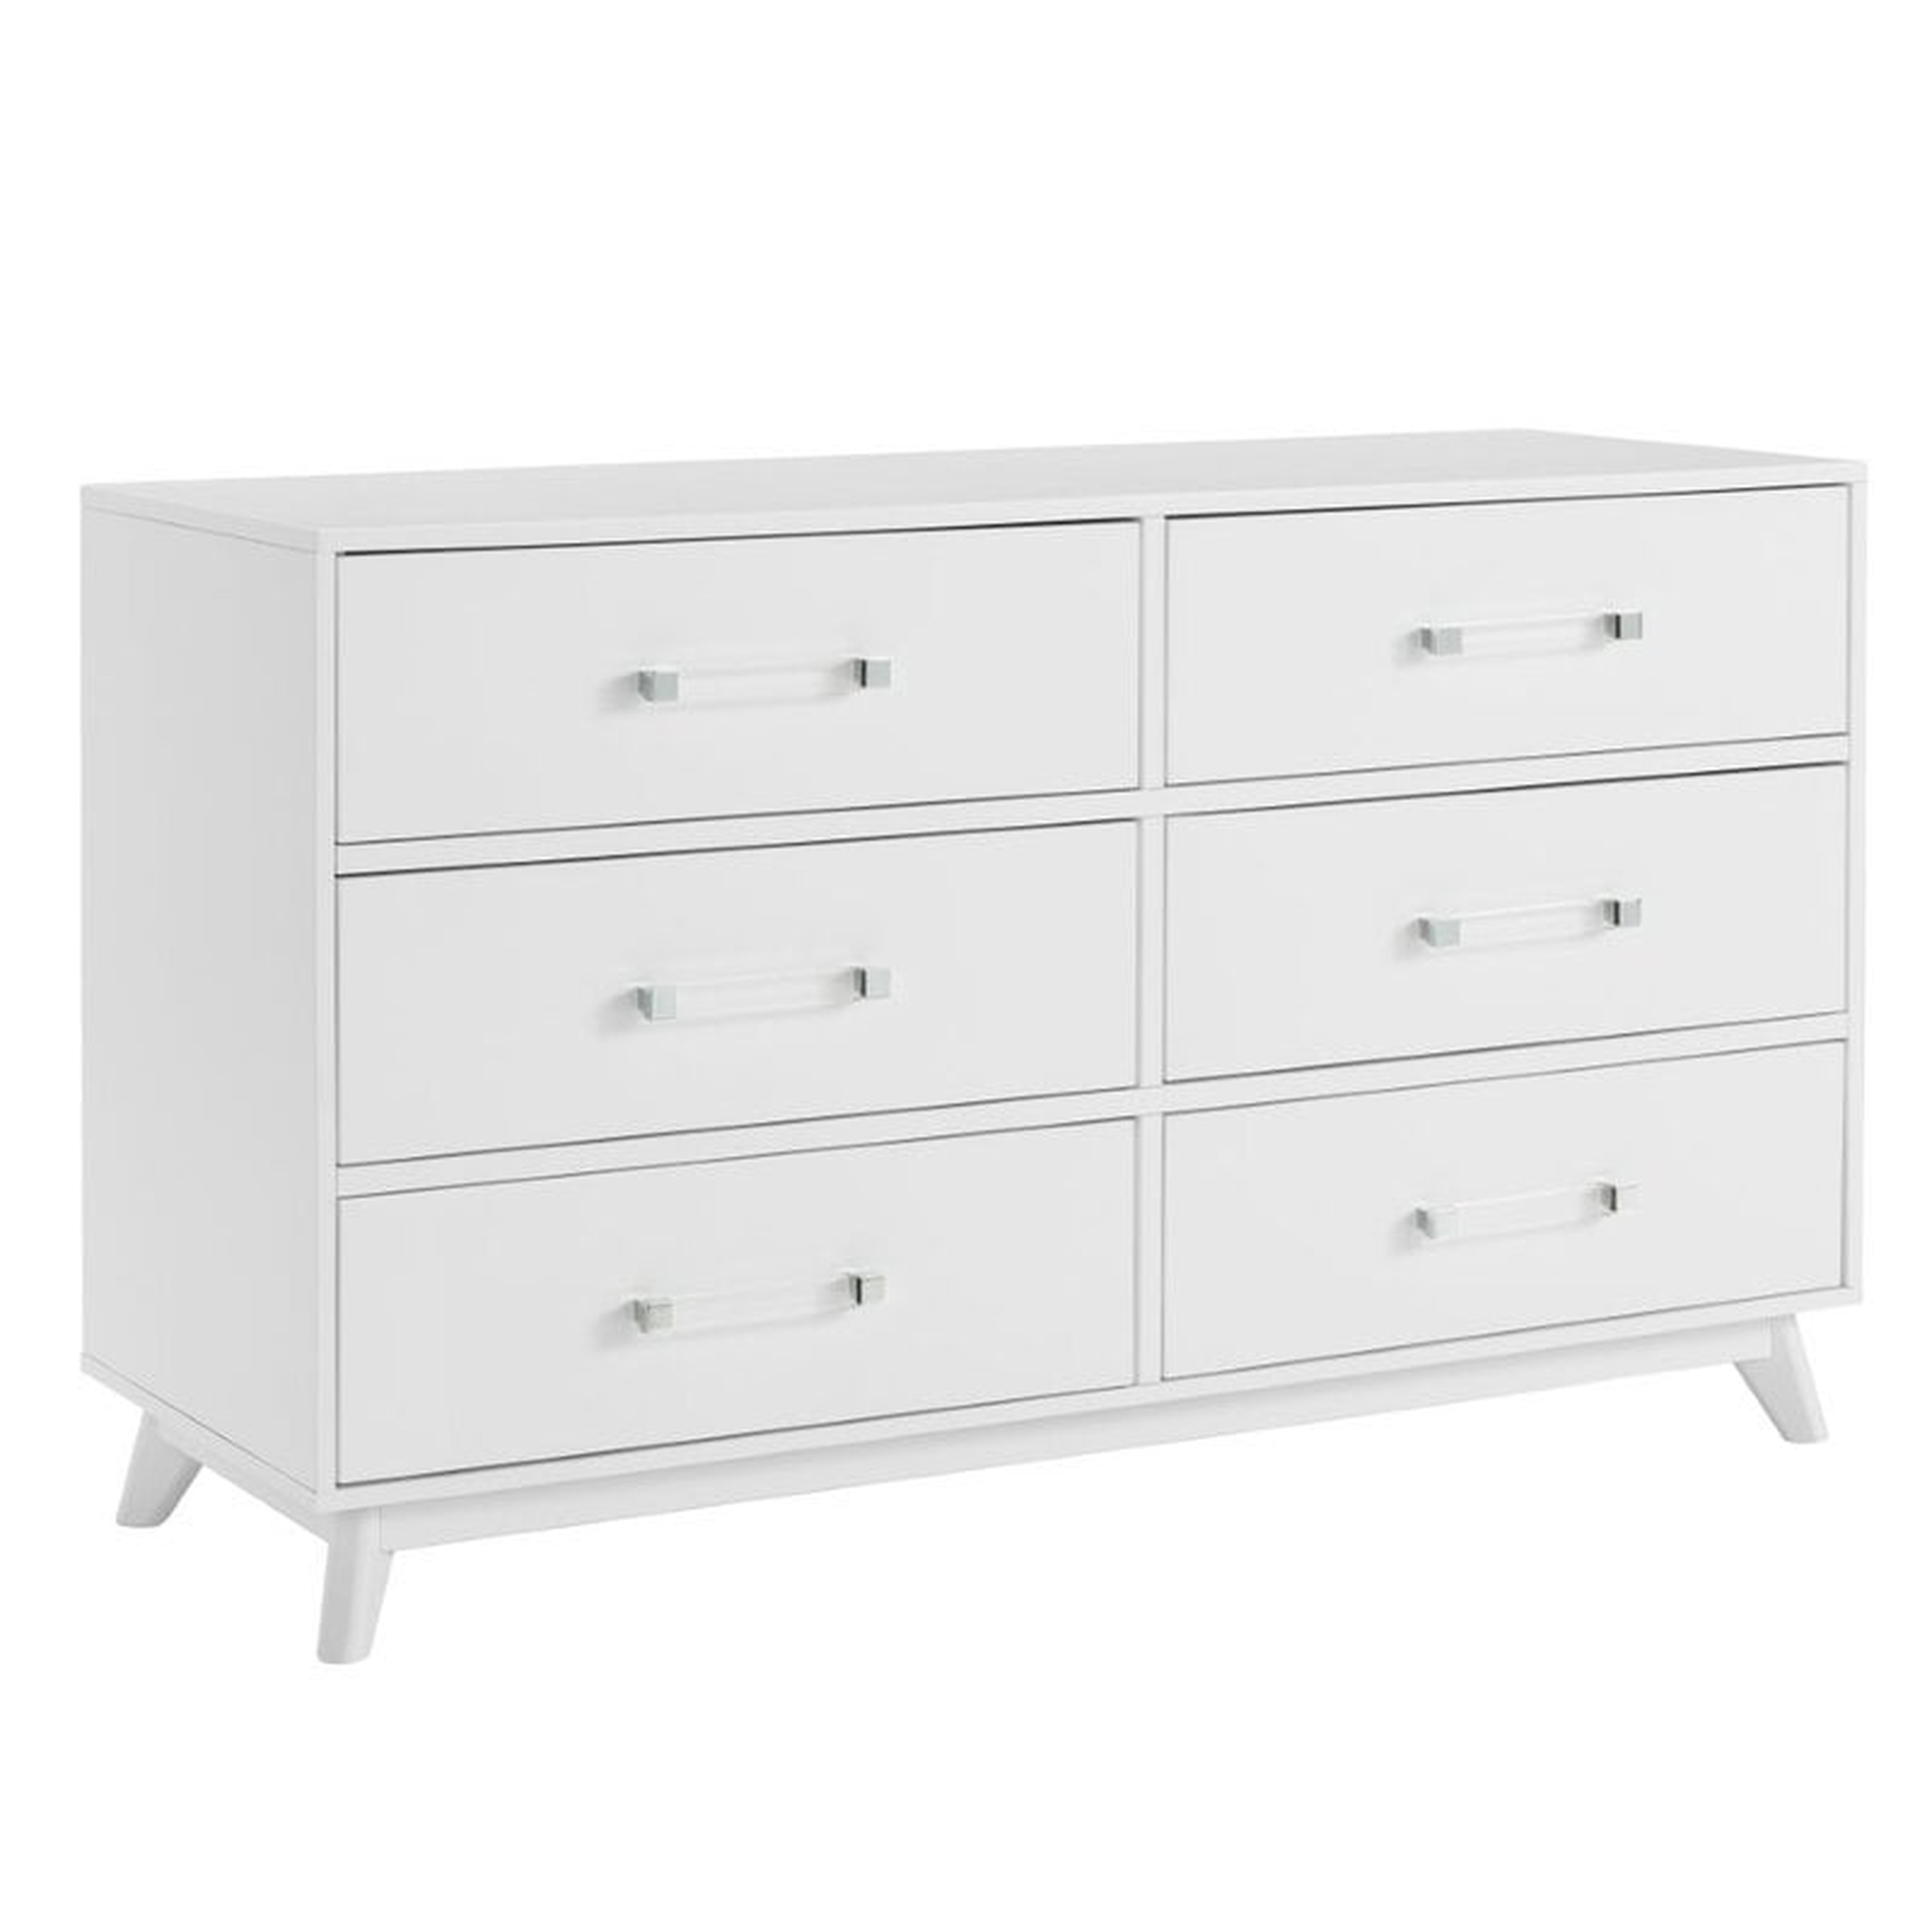 Tazewell Changing Table Dresser with 2 Baskets - Wayfair